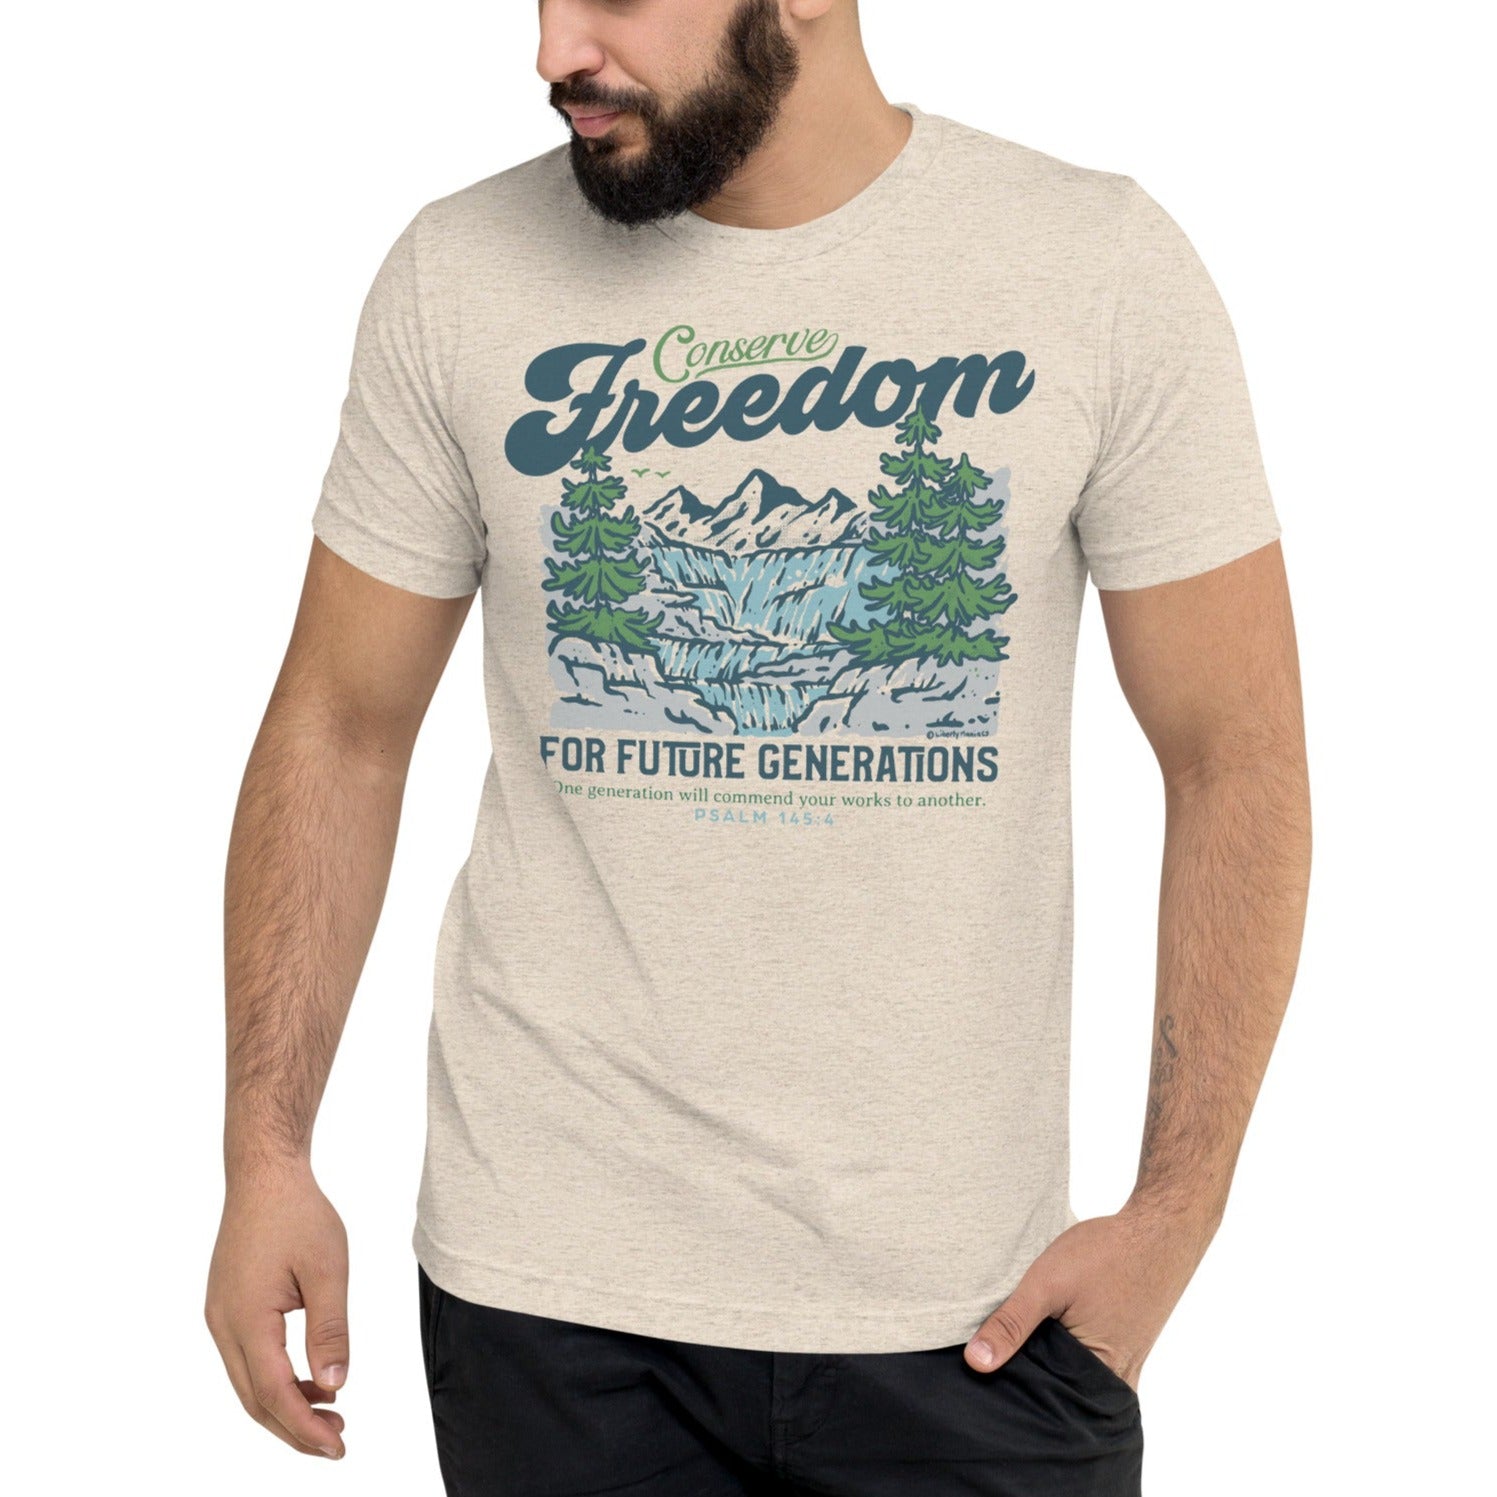 Conserve Freedom for Future Generations Tri-Blend T-Shirt